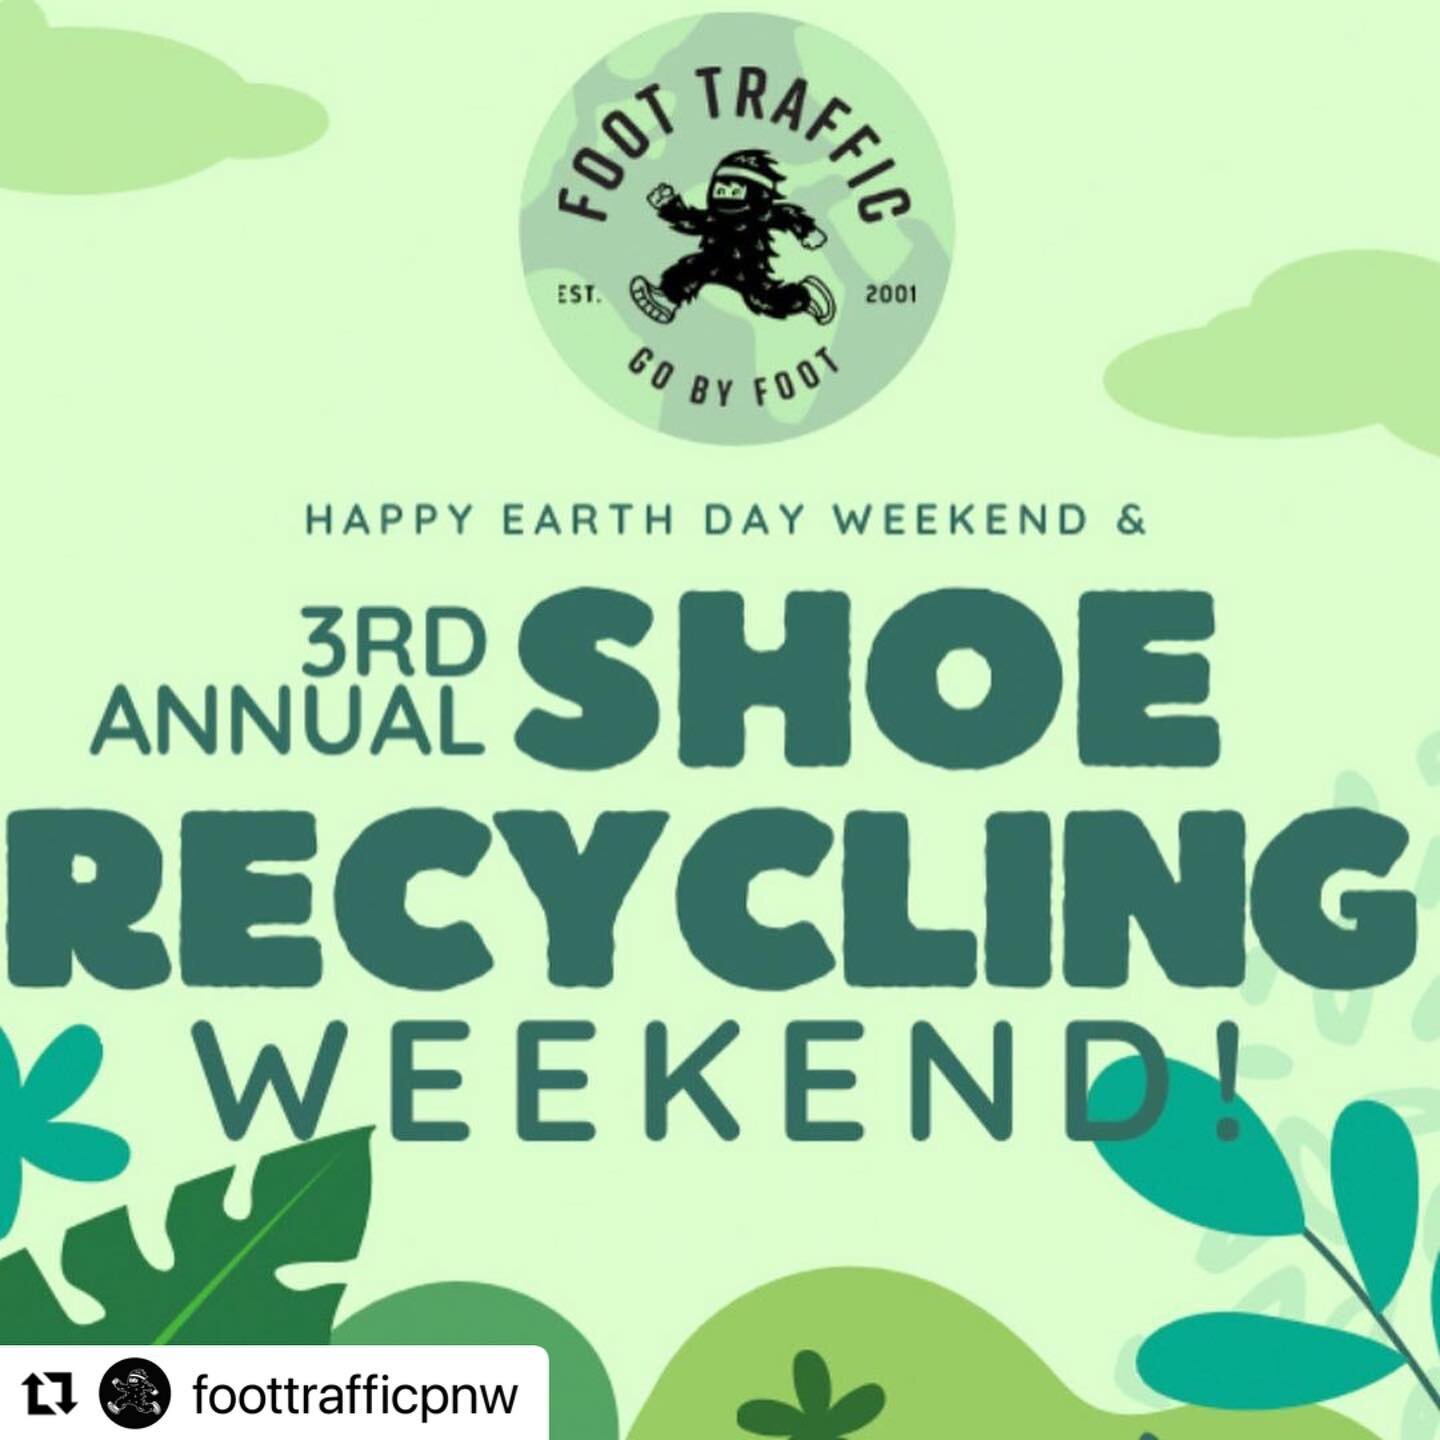 #Repost @foottrafficpnw with @use.repost
・・・
How are you celebrating Earth Day this Saturday?

We are celebrating EARTH DAY by hosting our THIRD ANNUAL SHOE RECYCLE event at all our locations this weekend, Saturday April 22rd &amp; Sunday April 23rd!